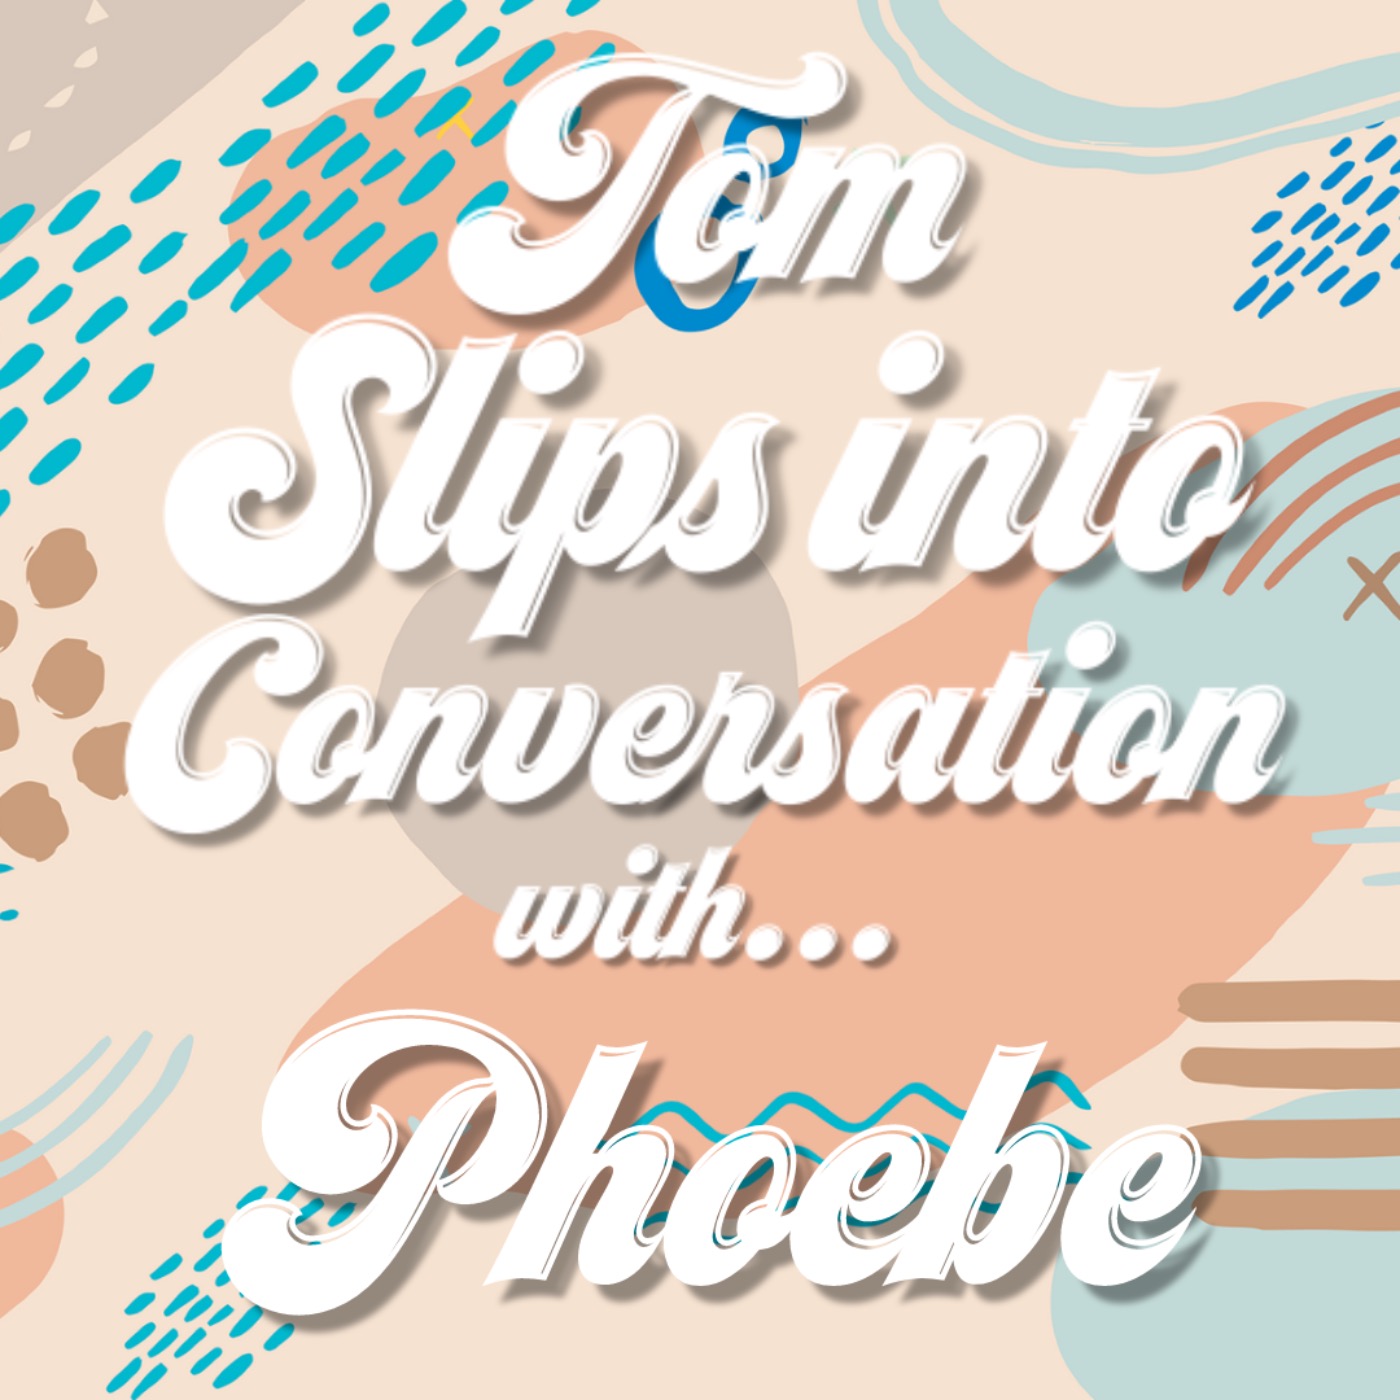 cover art for Tom slips into conversation with Phoebe